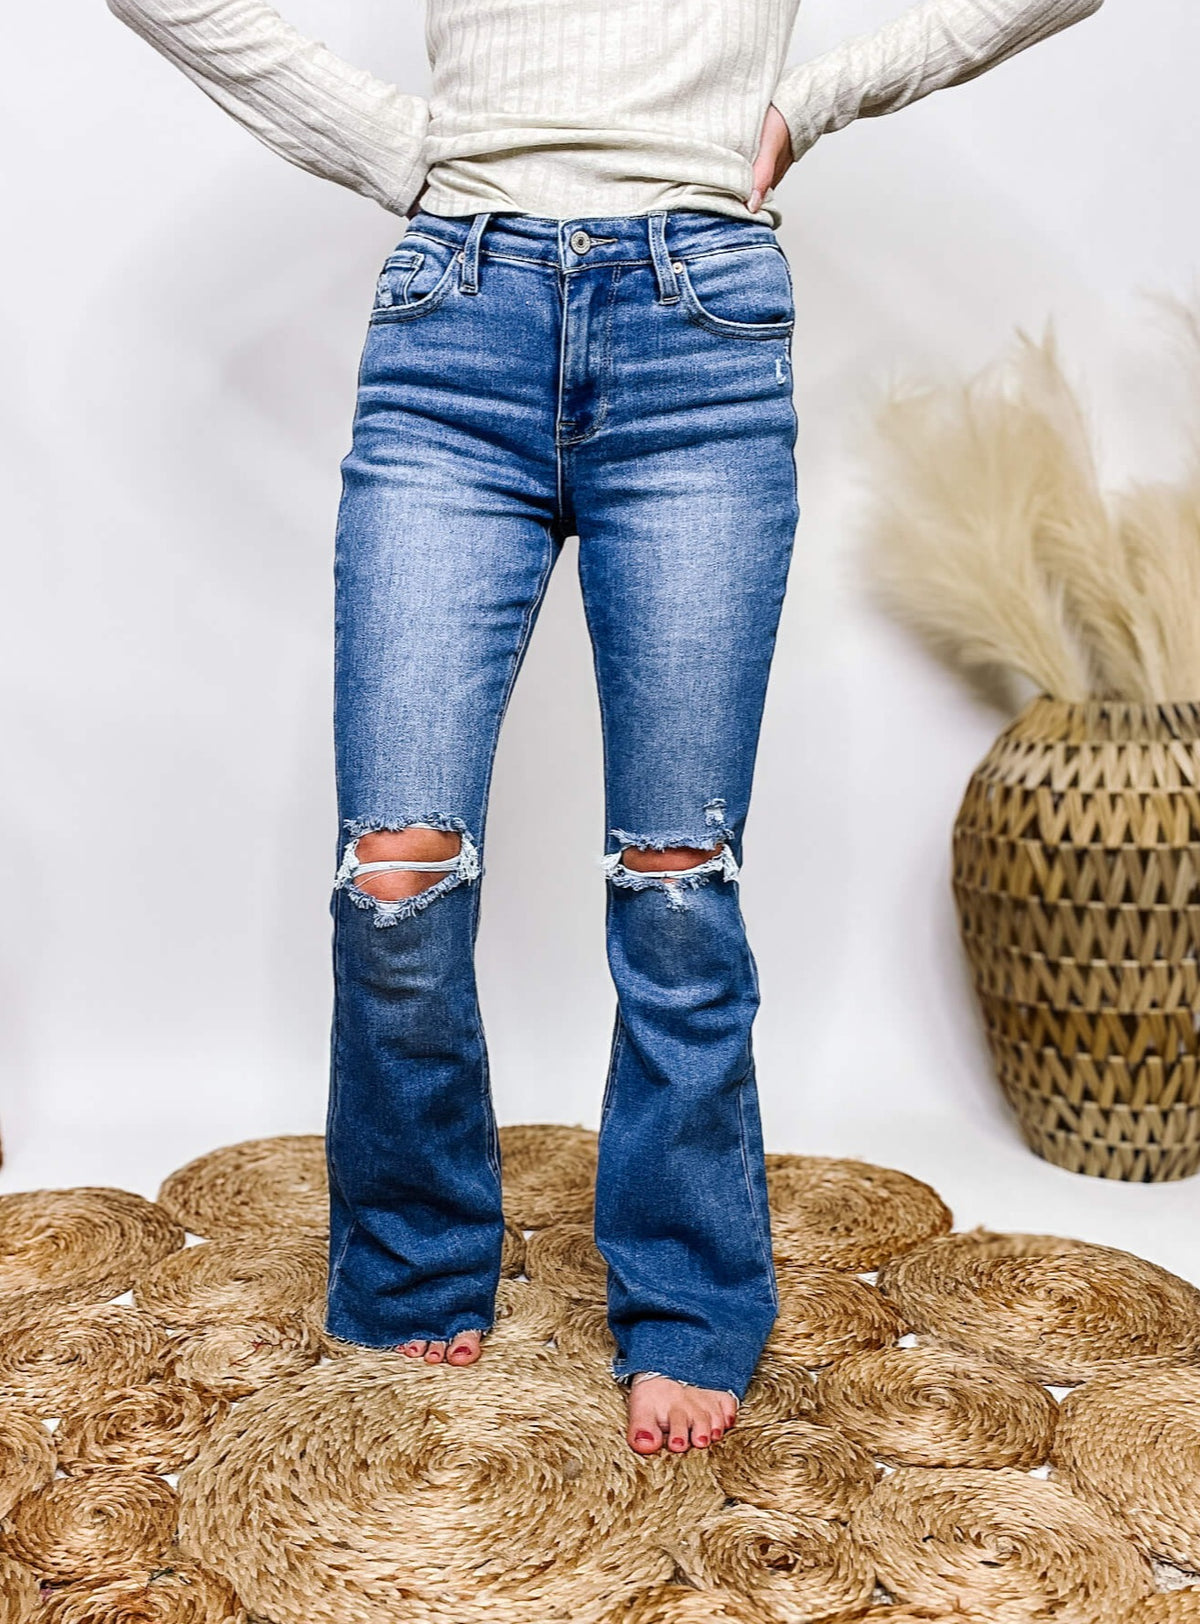 Stretchy Bootcut Distressed High Rise KanCan Jeans